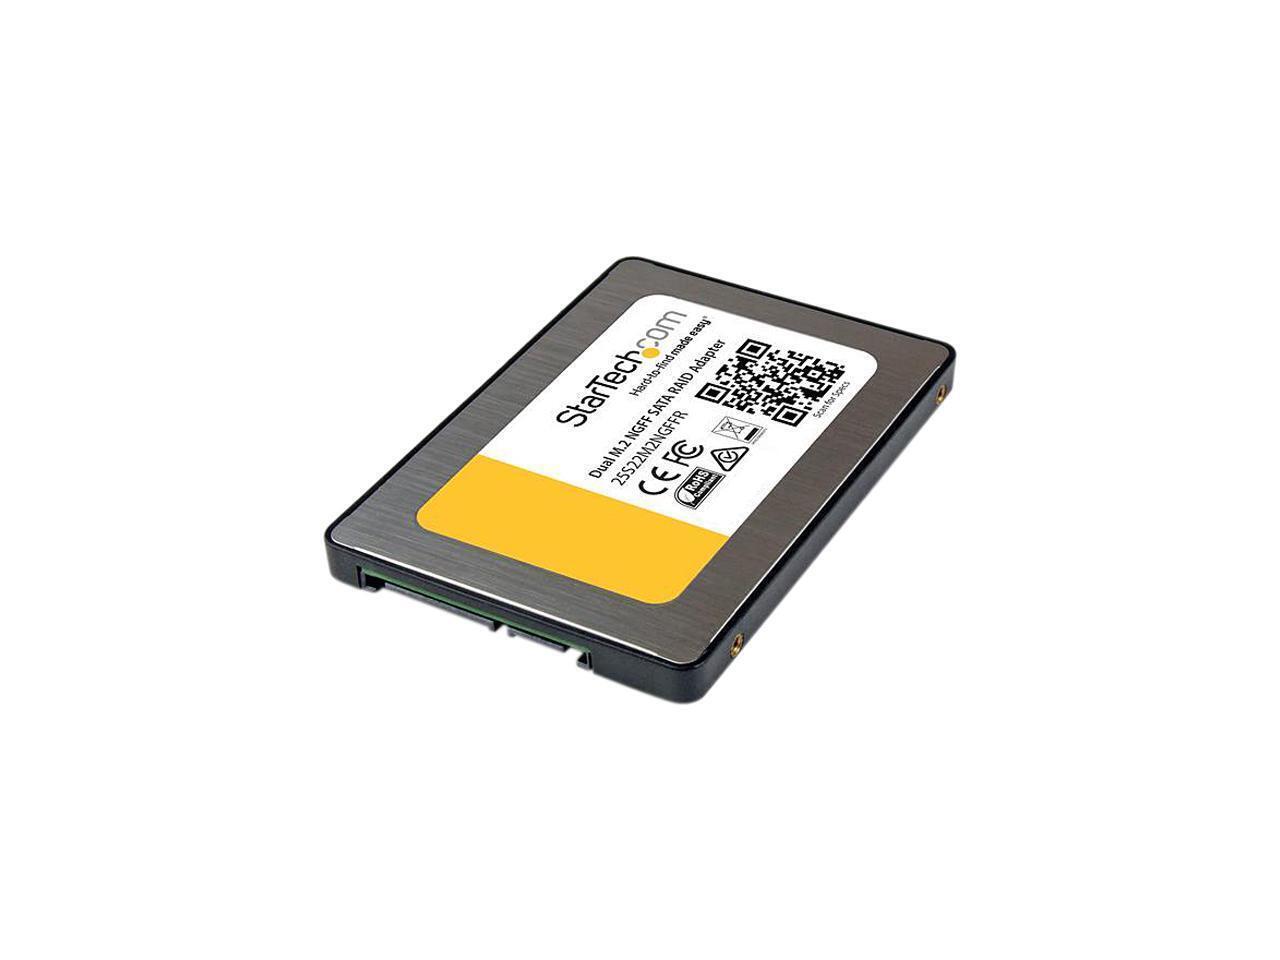 StarTech.com 25S22M2NGFFR Dual M.2 SATA Adapter with RAID - 2x M.2 SSDs to 2.5in